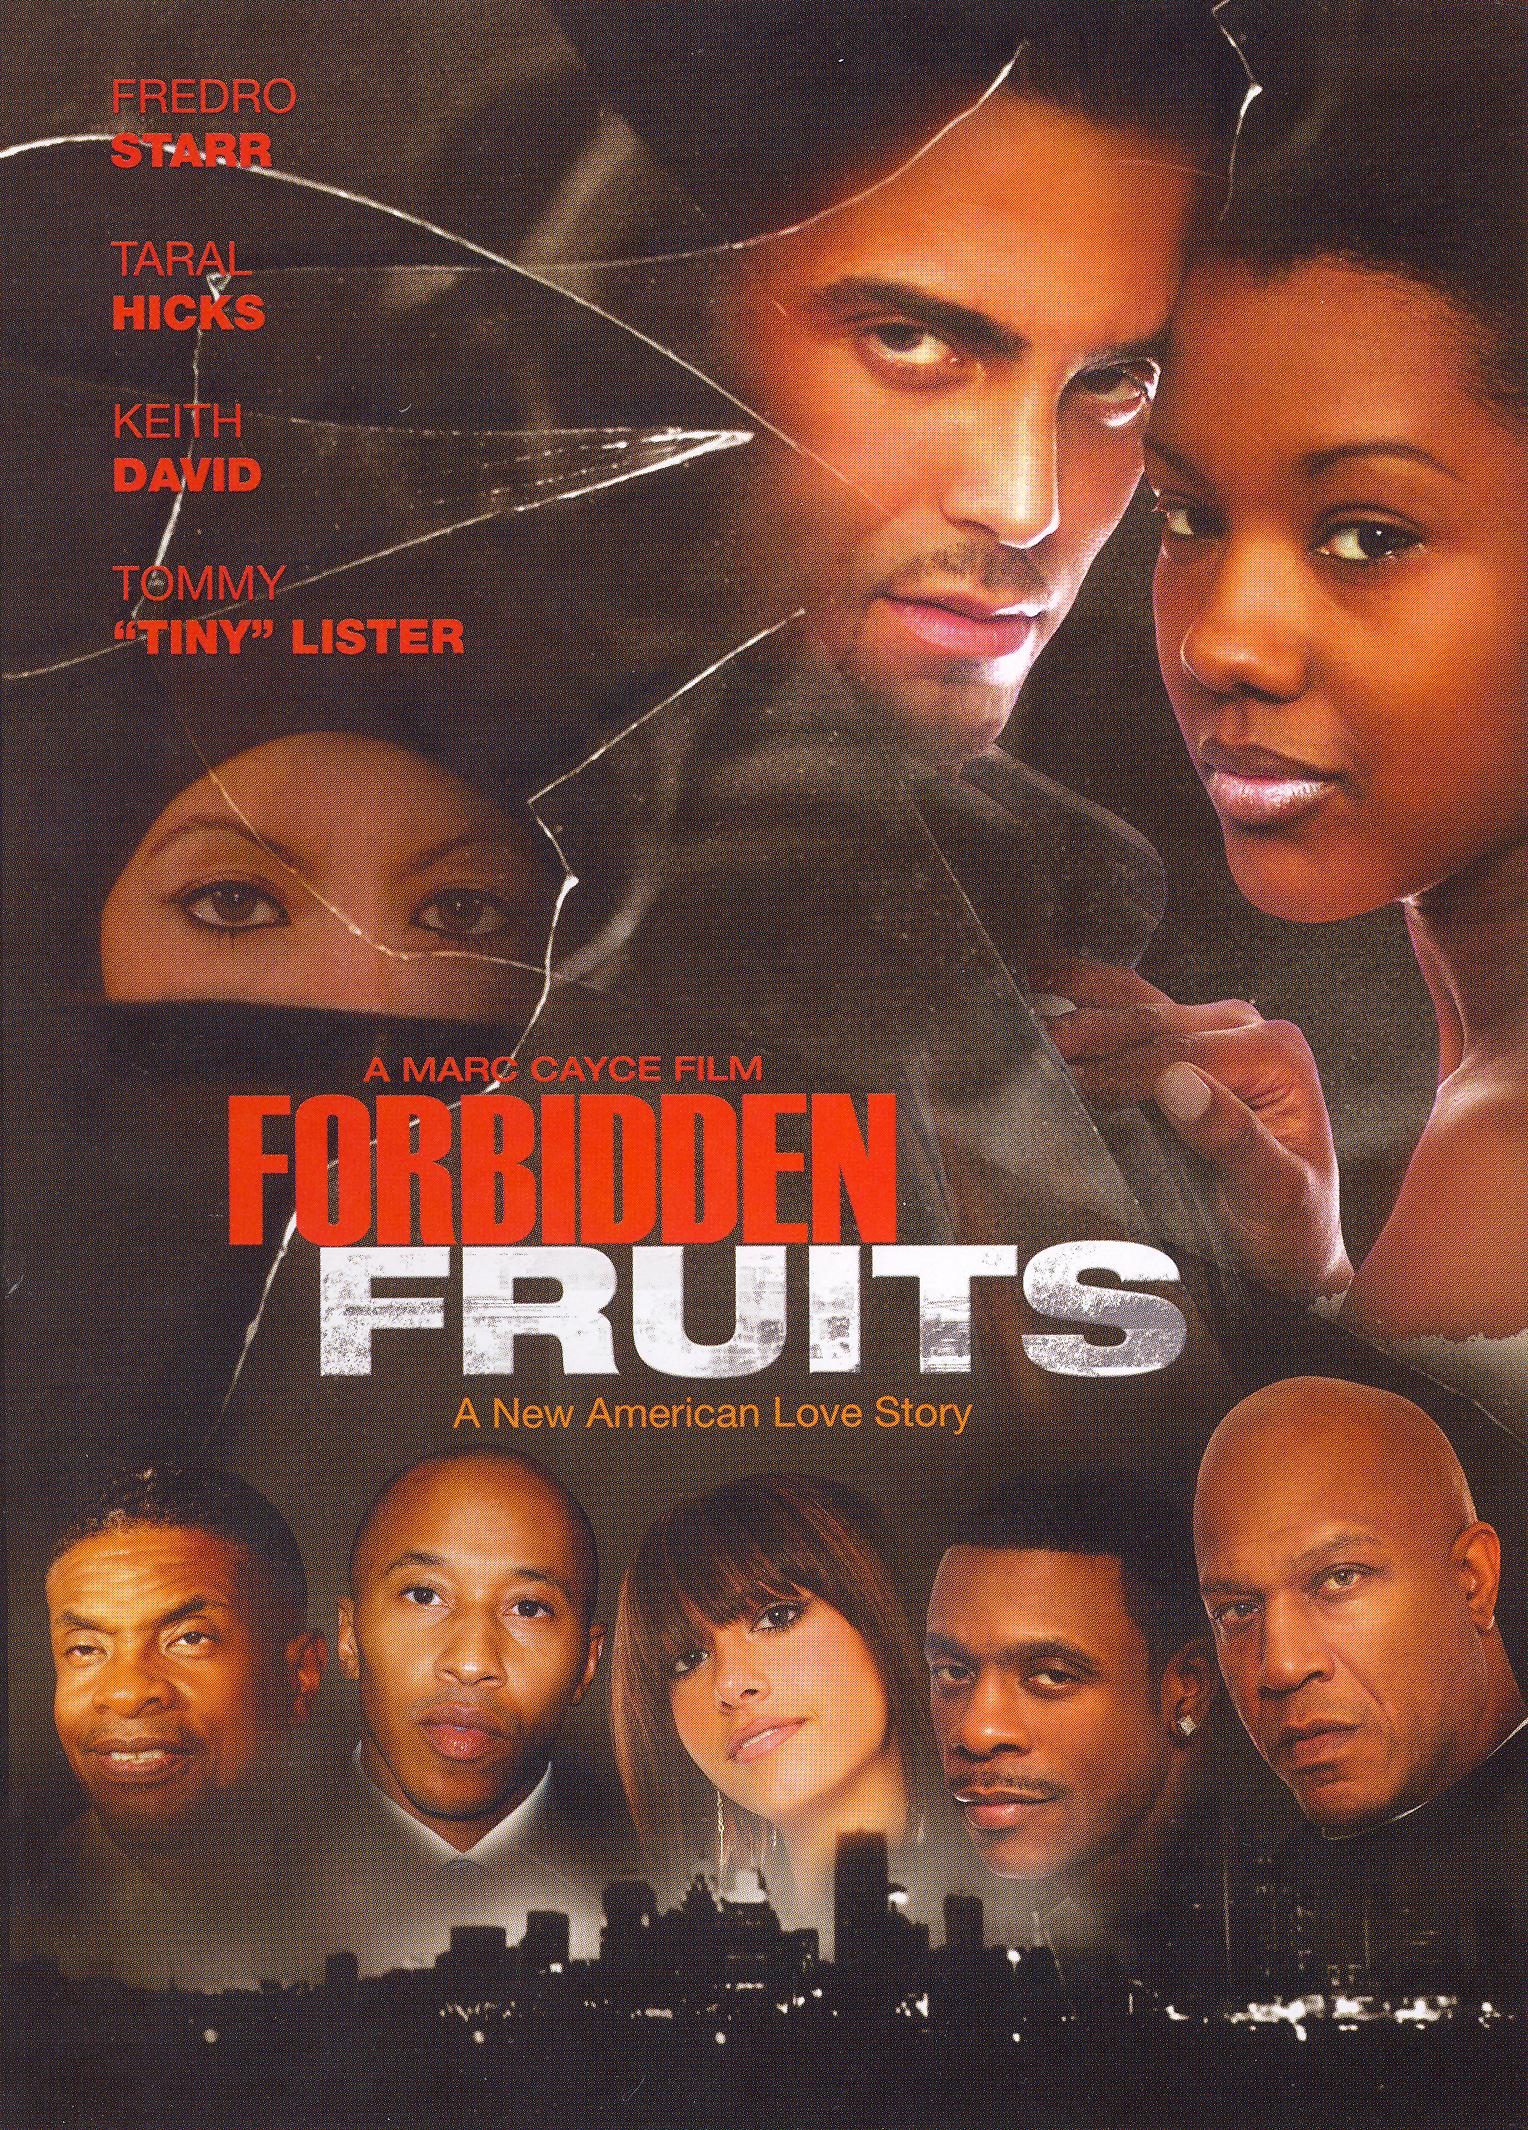 Forbidden Fruits Marc Cayce Synopsis, Characteristics, Moods